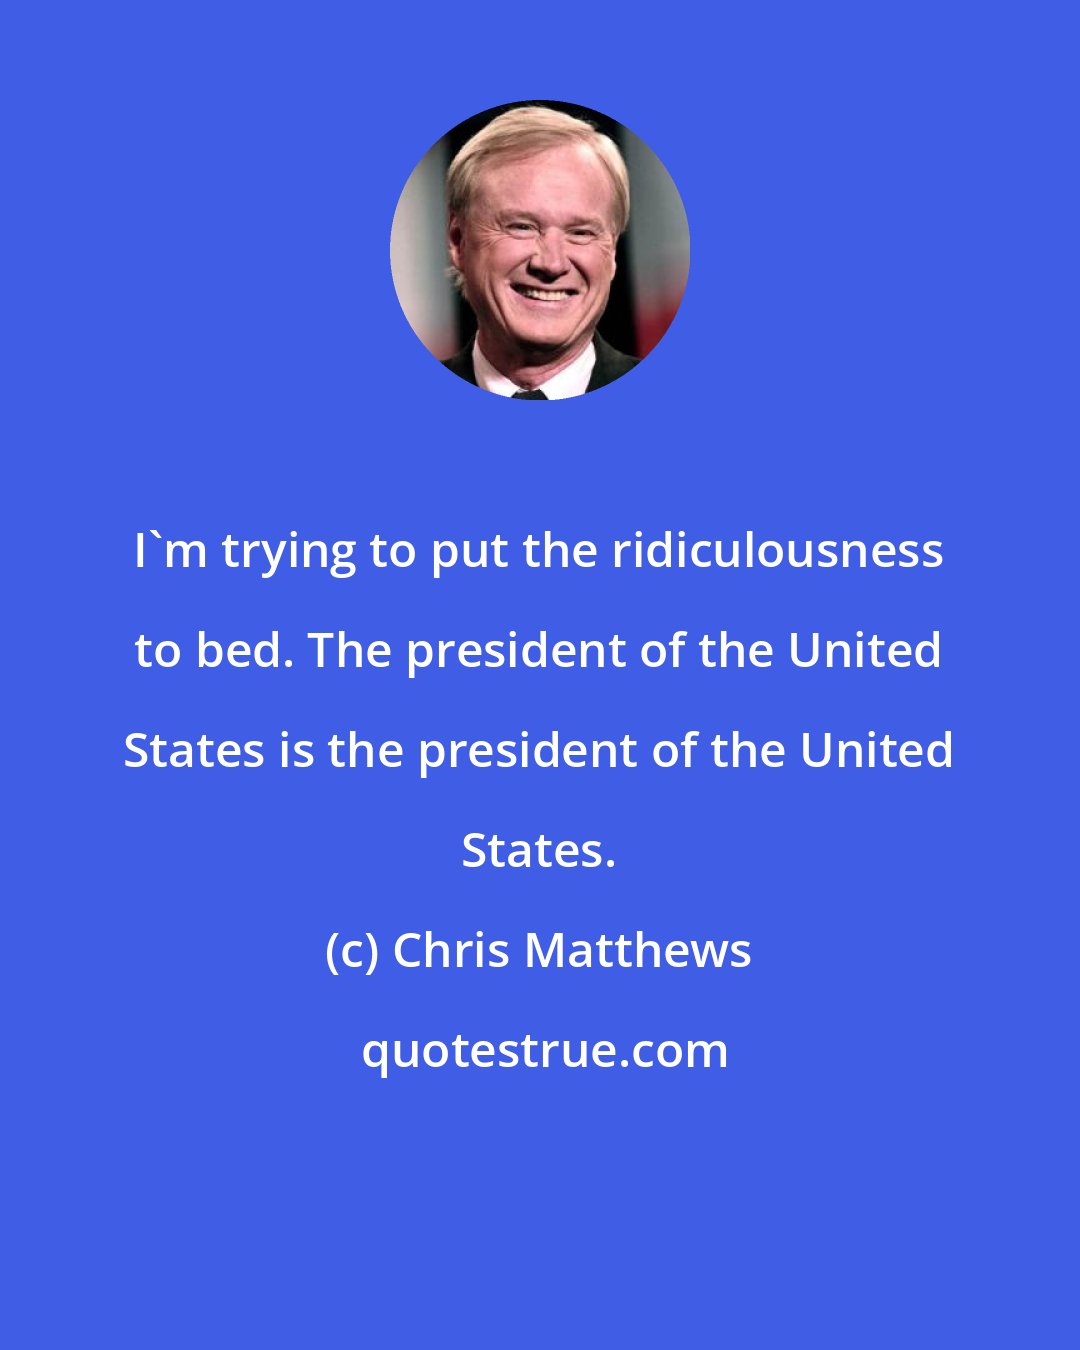 Chris Matthews: I'm trying to put the ridiculousness to bed. The president of the United States is the president of the United States.